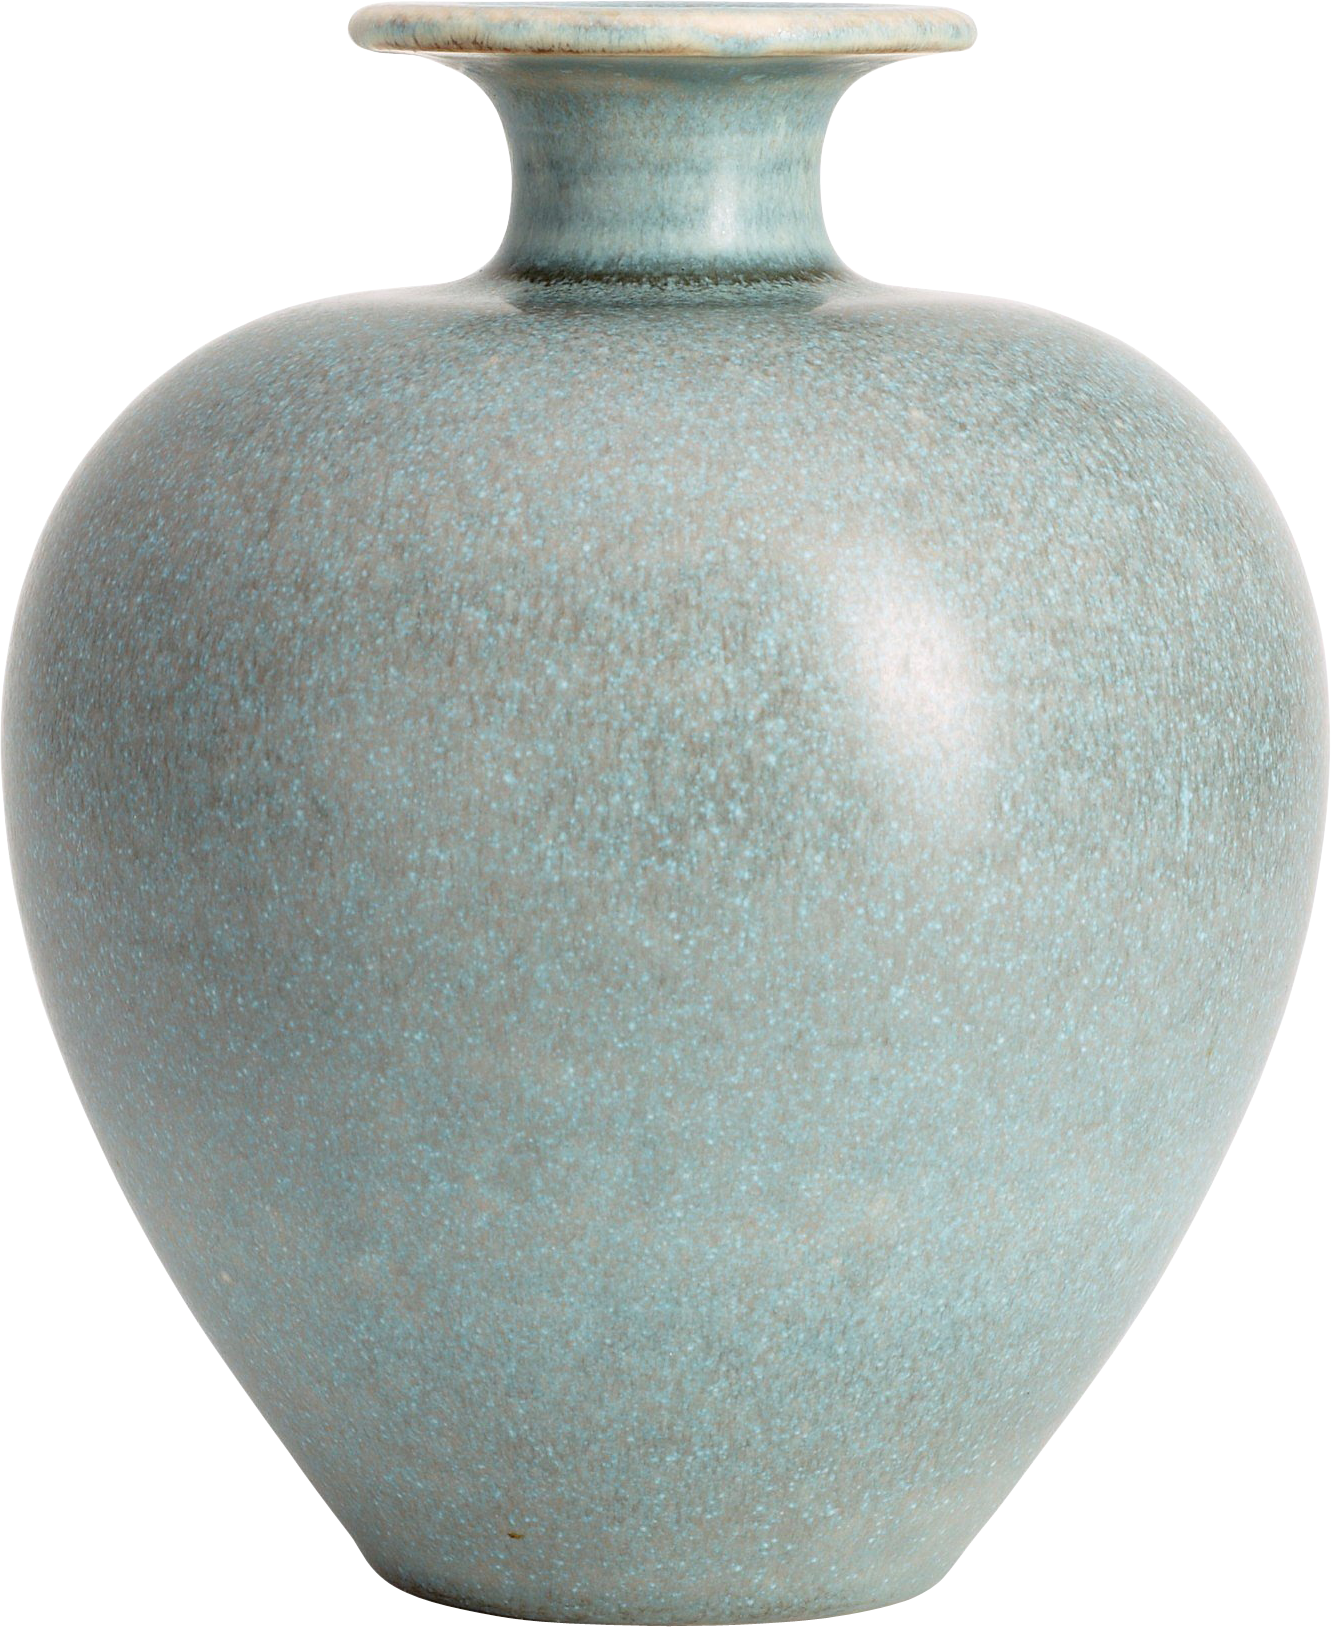 Empty Vase PNG Image with Transparent Background